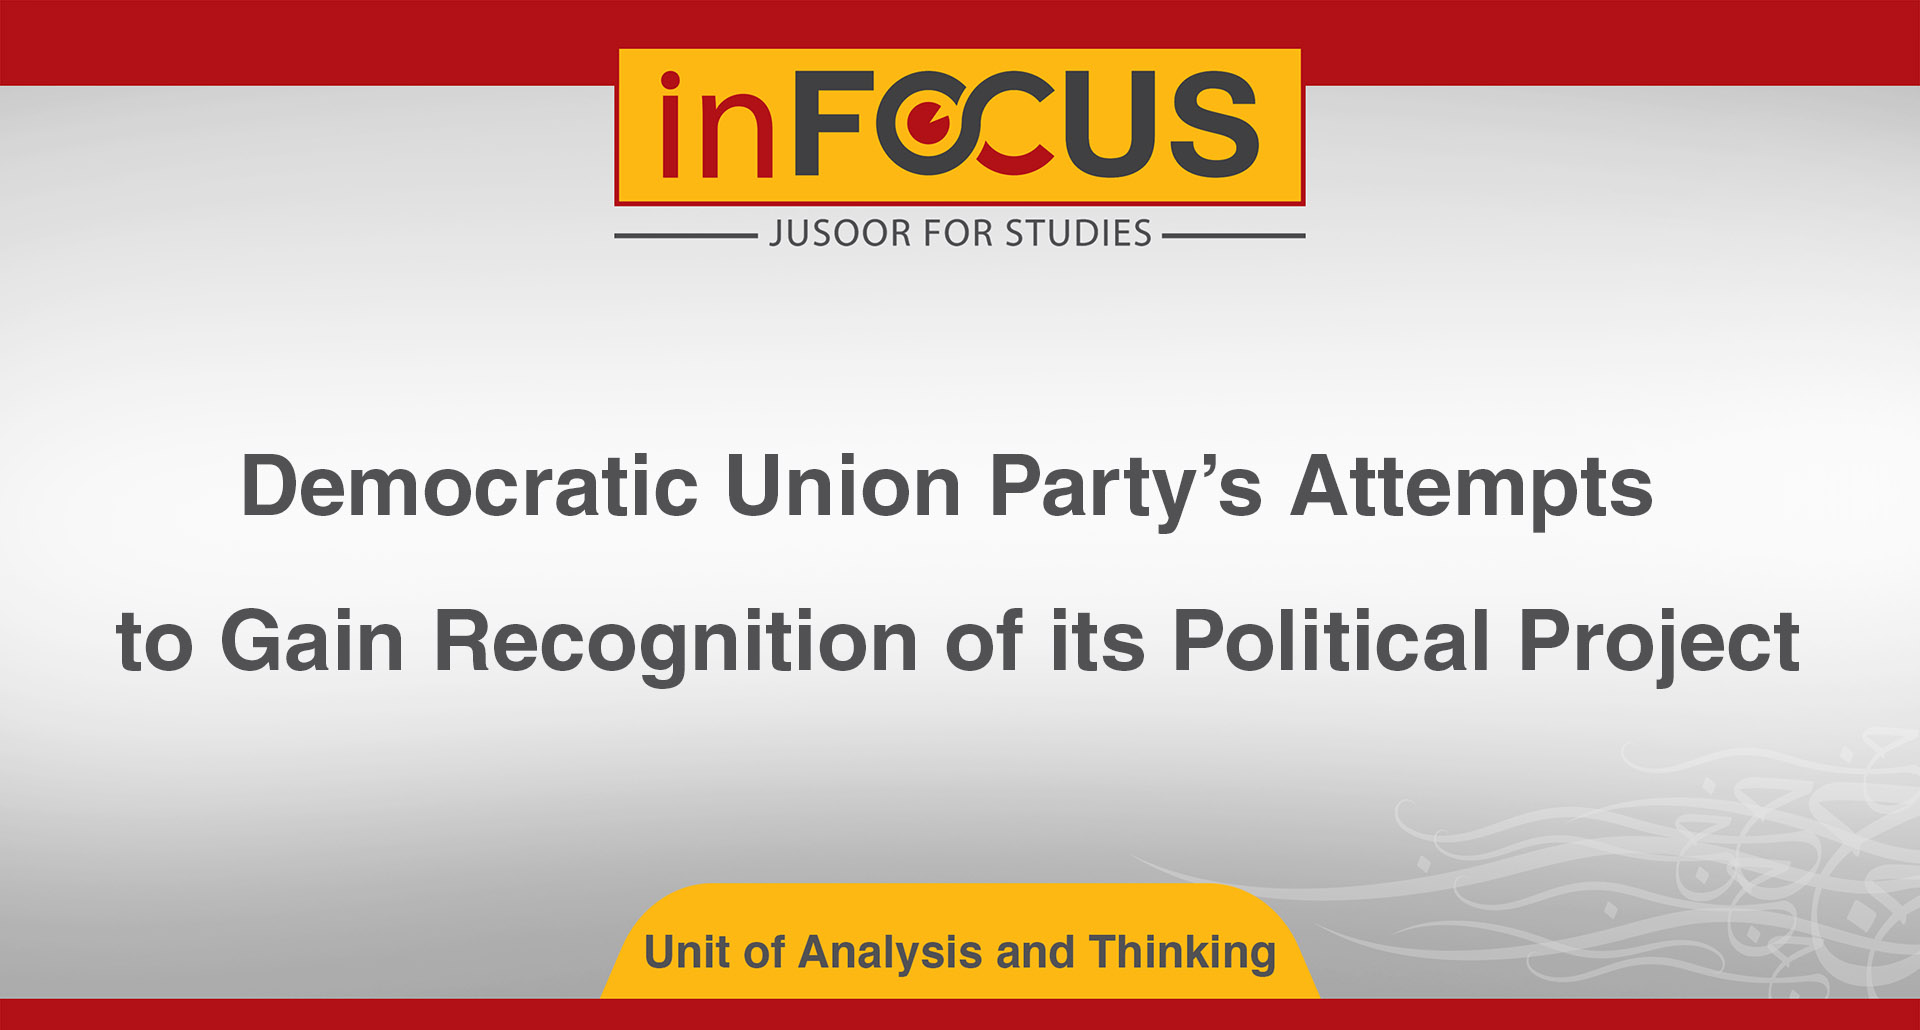 Democratic Union Party’s Attempts to Gain Recognition of its Political Project